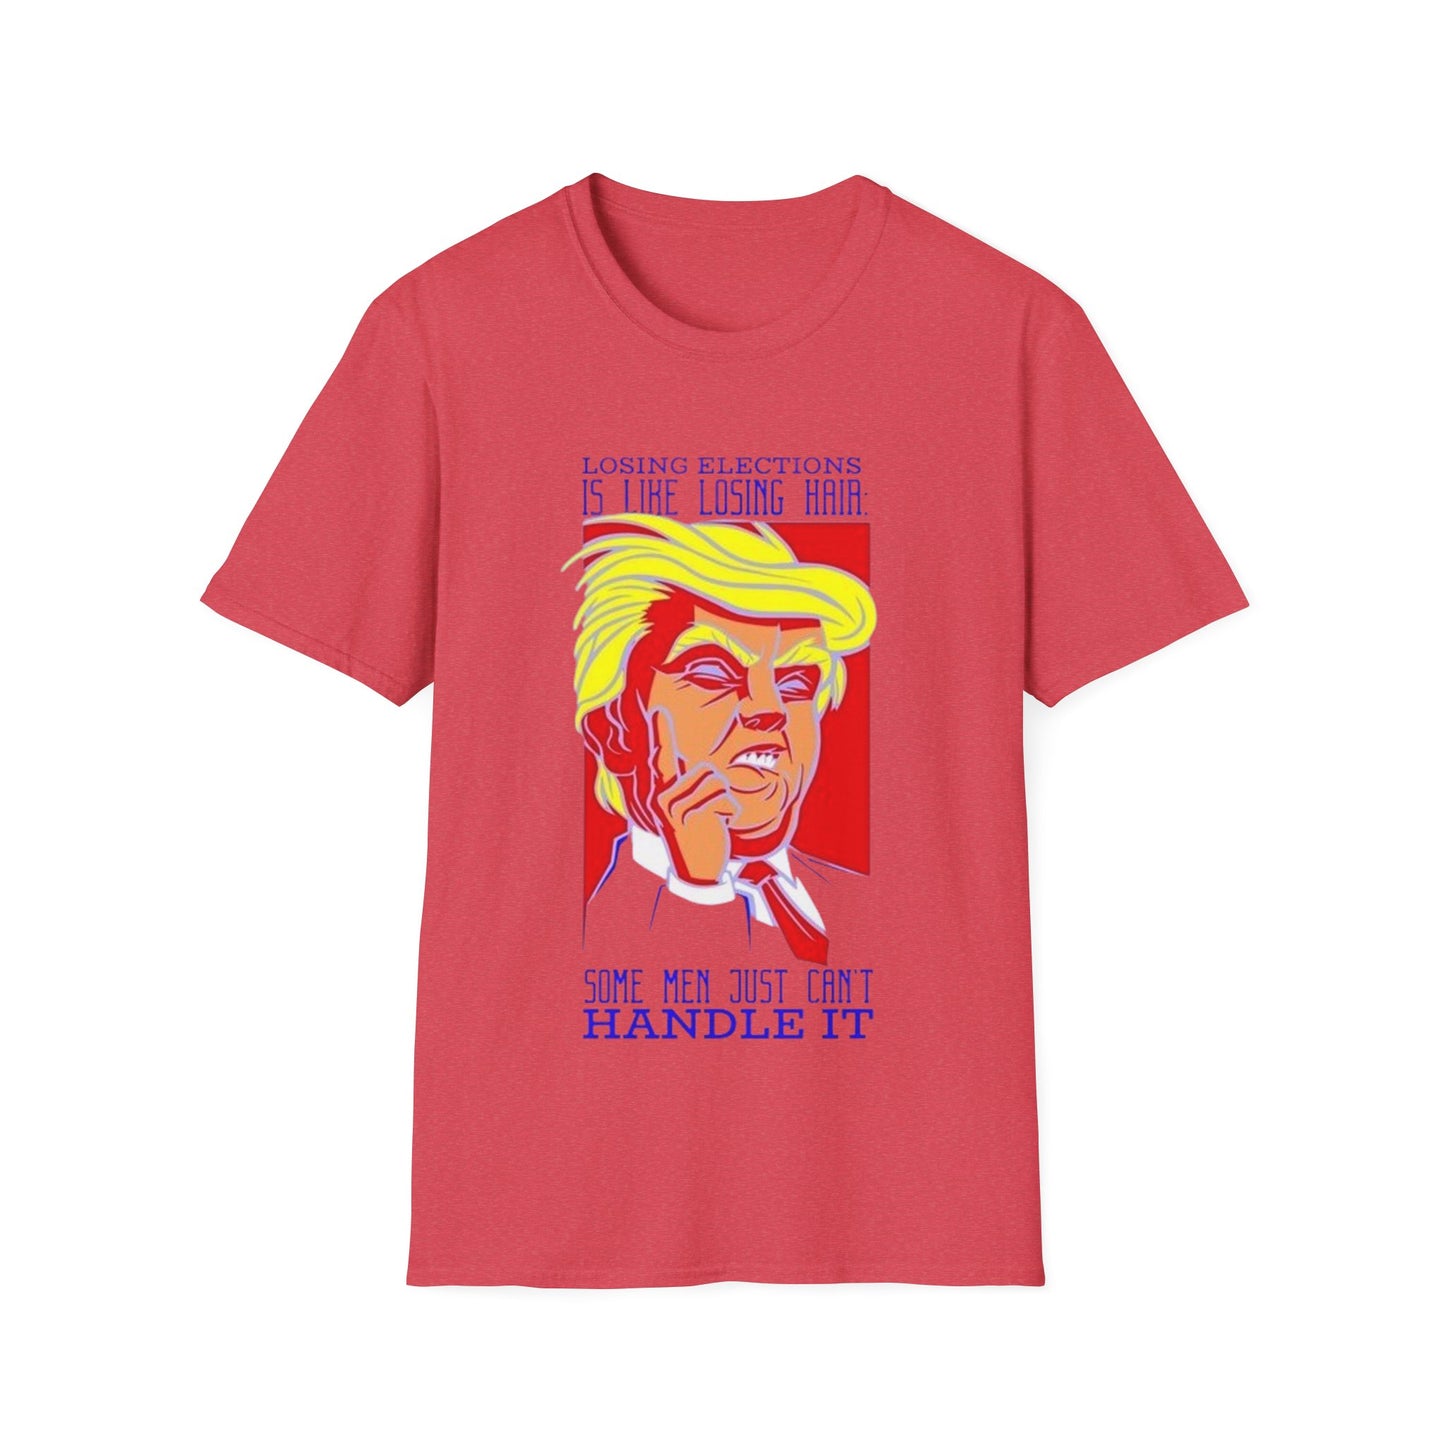 Losing Elections is like losing hair... - Unisex Softstyle T-Shirt